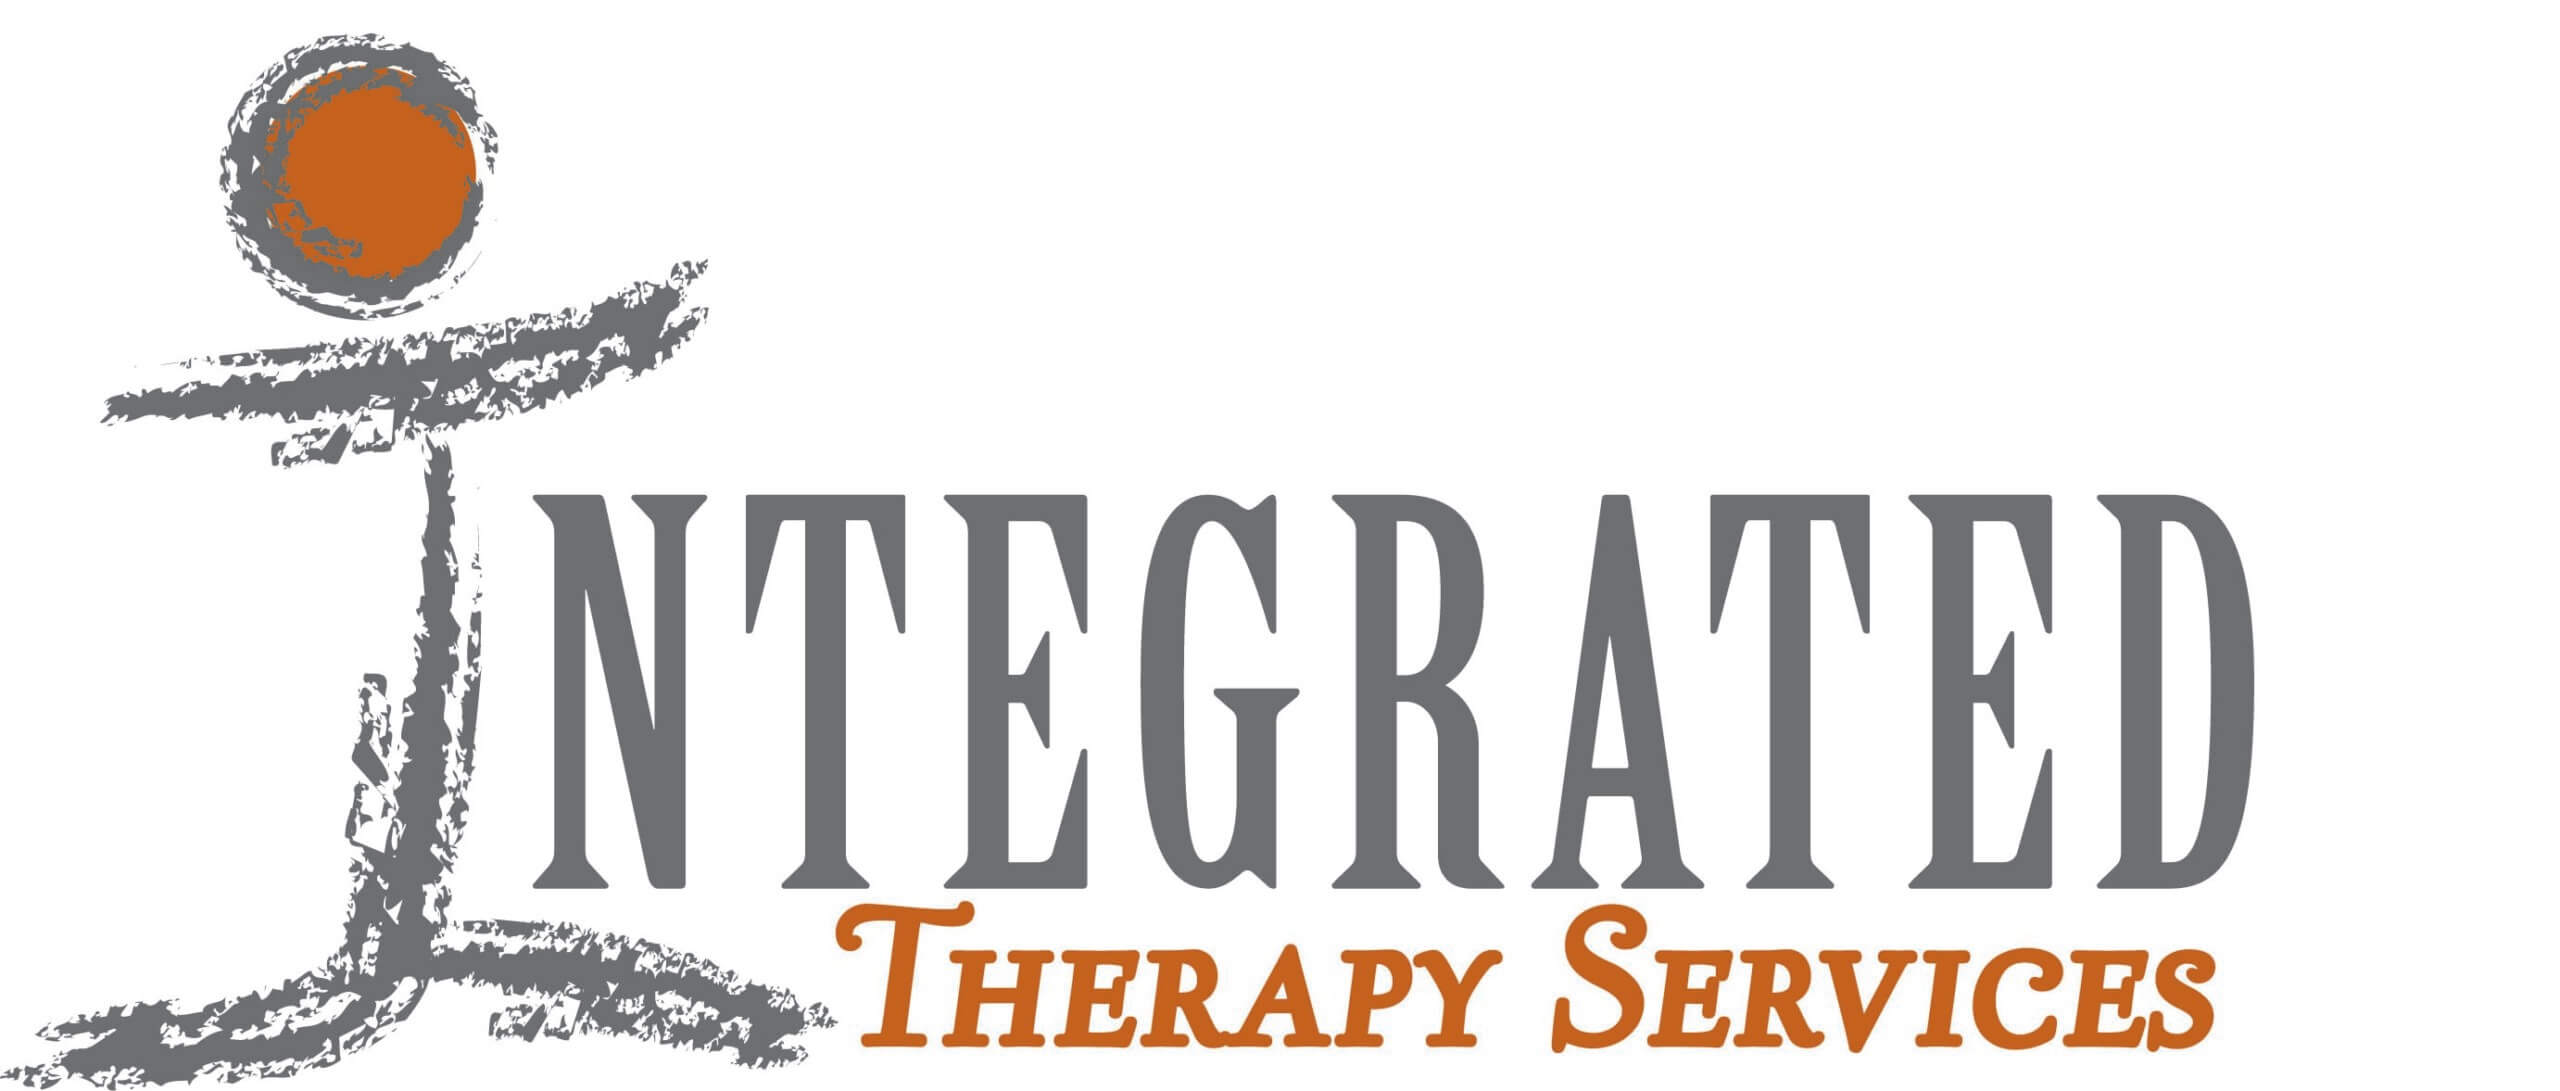 Integrated Therapy Services 250 Sponsor